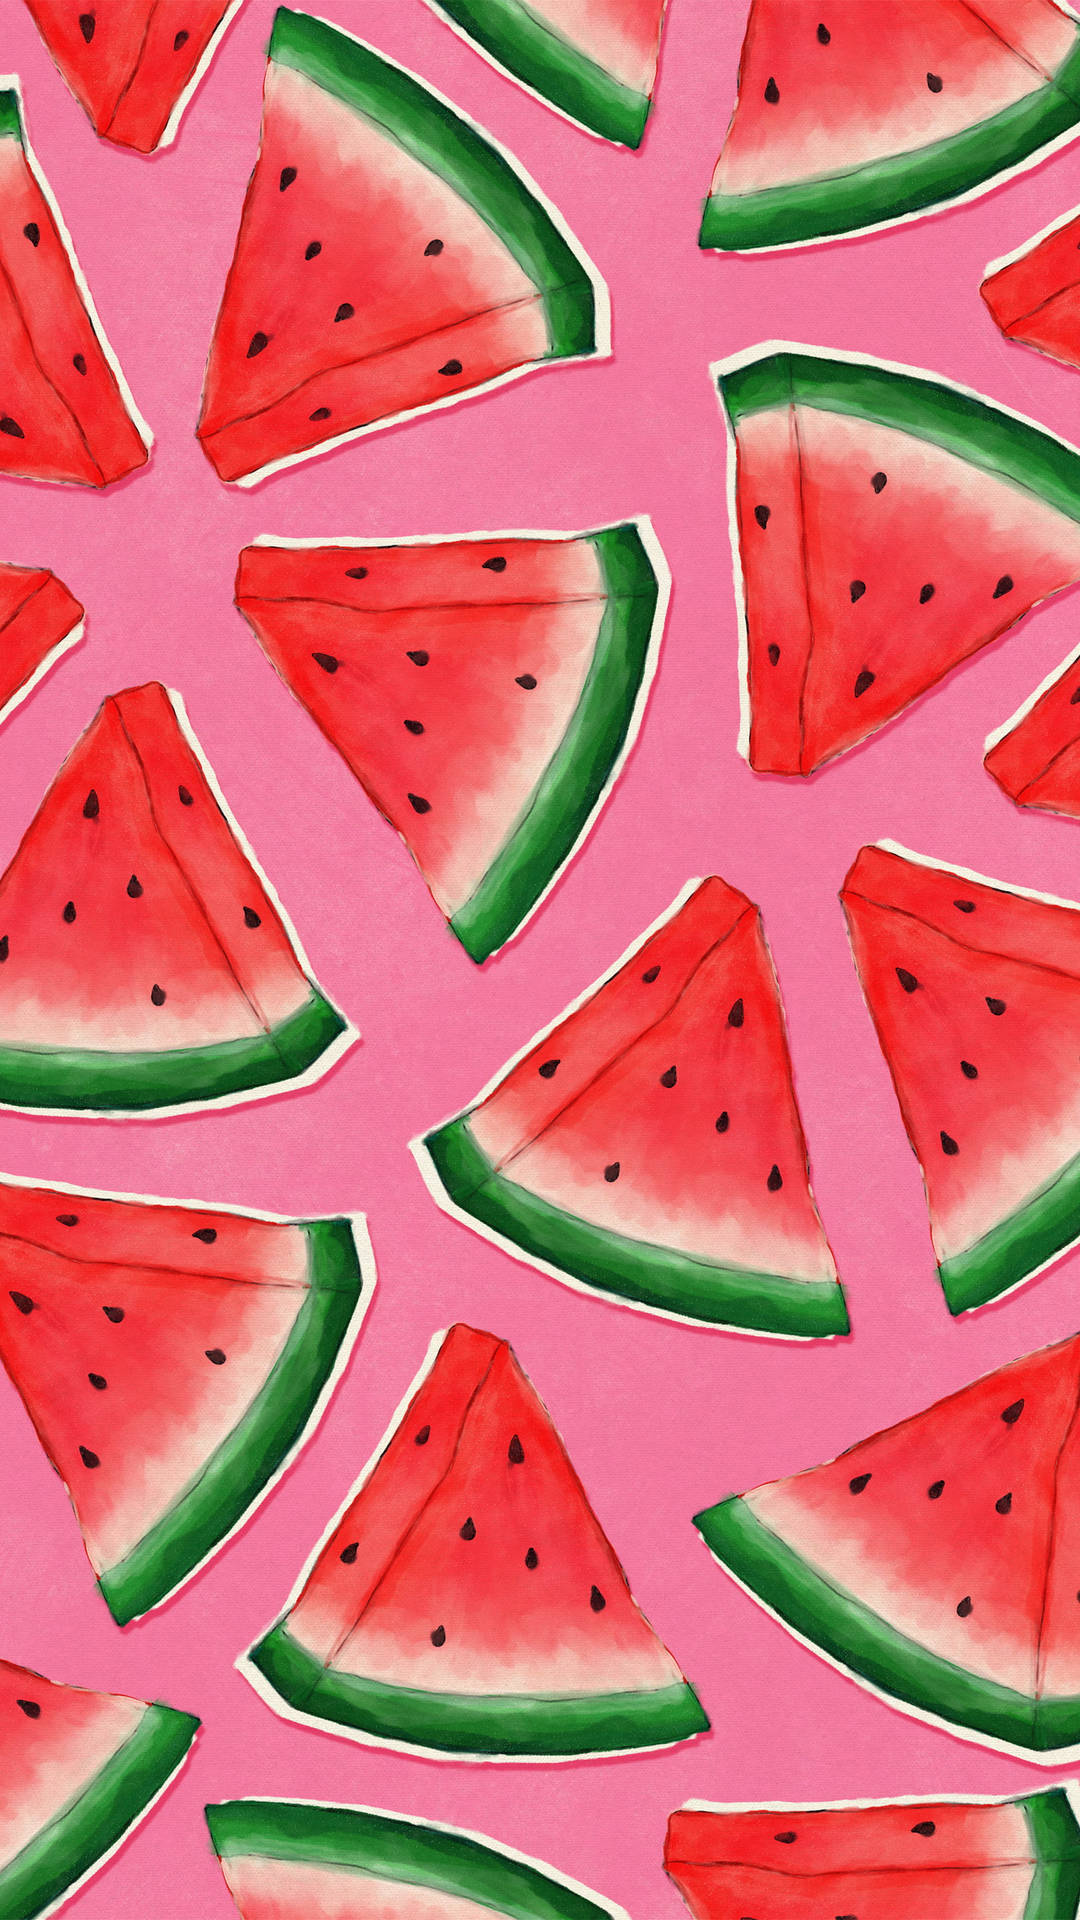 Cute Watermelon On Pink Surface Background